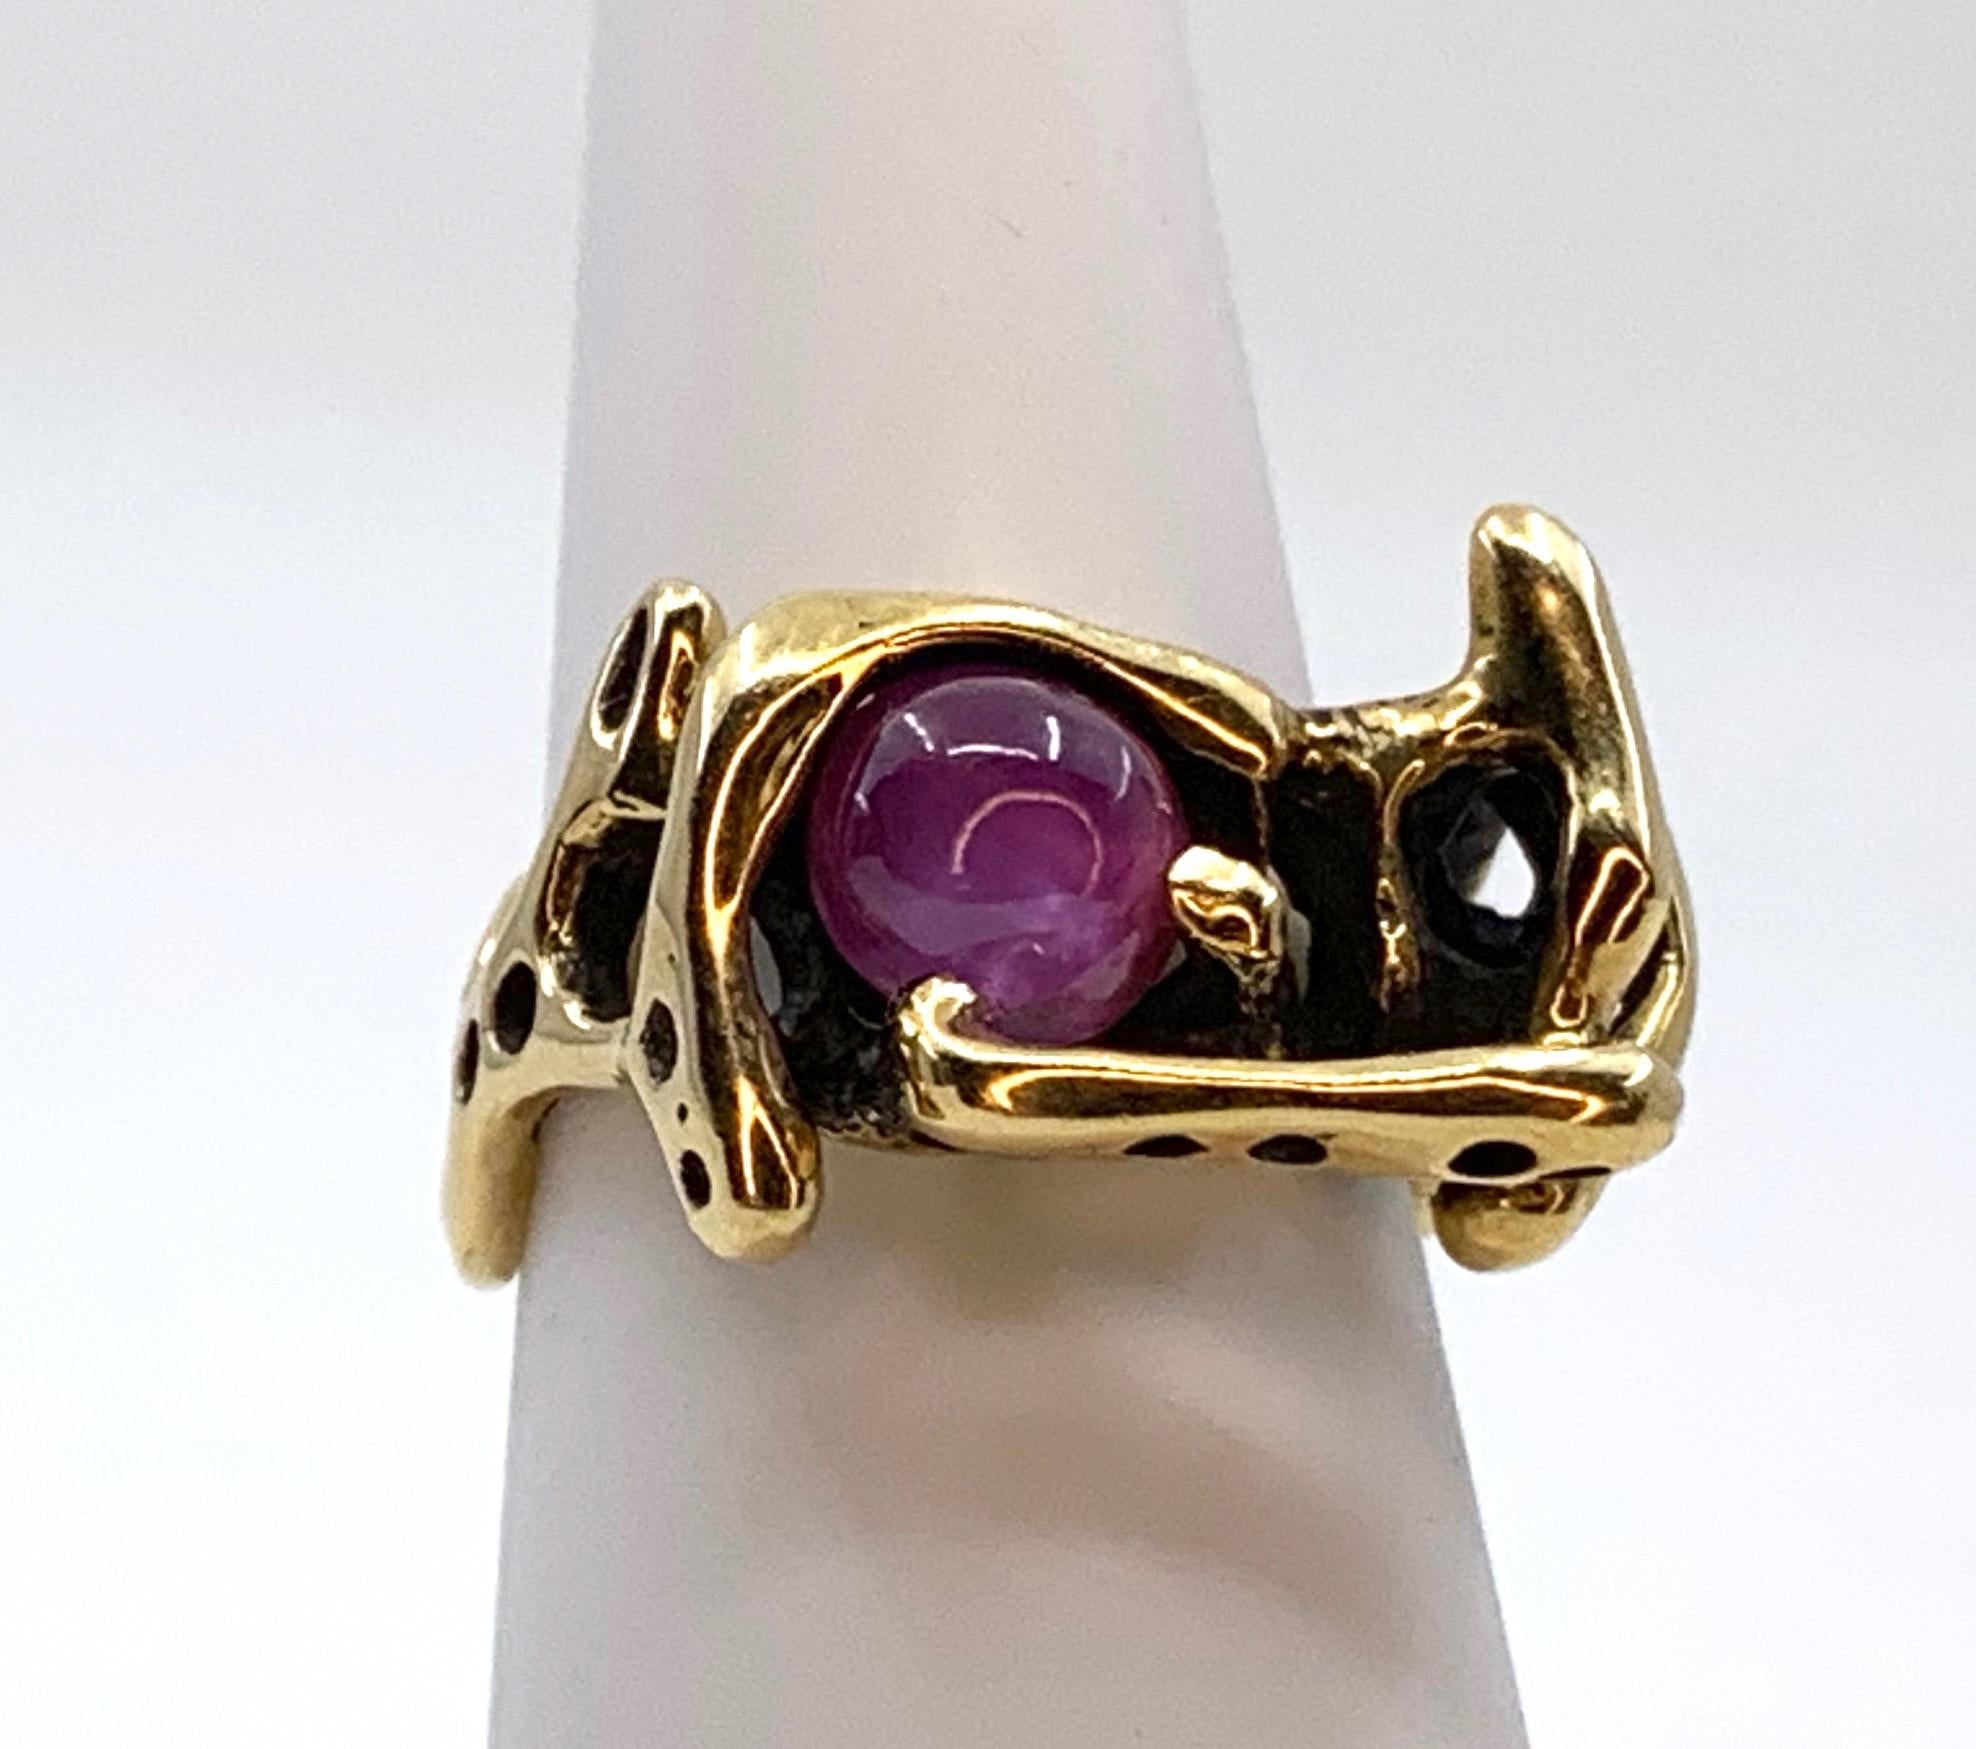 Abstract Studio Ring in 18 Karat Yellow Gold with 3.5 Carat Ruby Cabochon For Sale 1